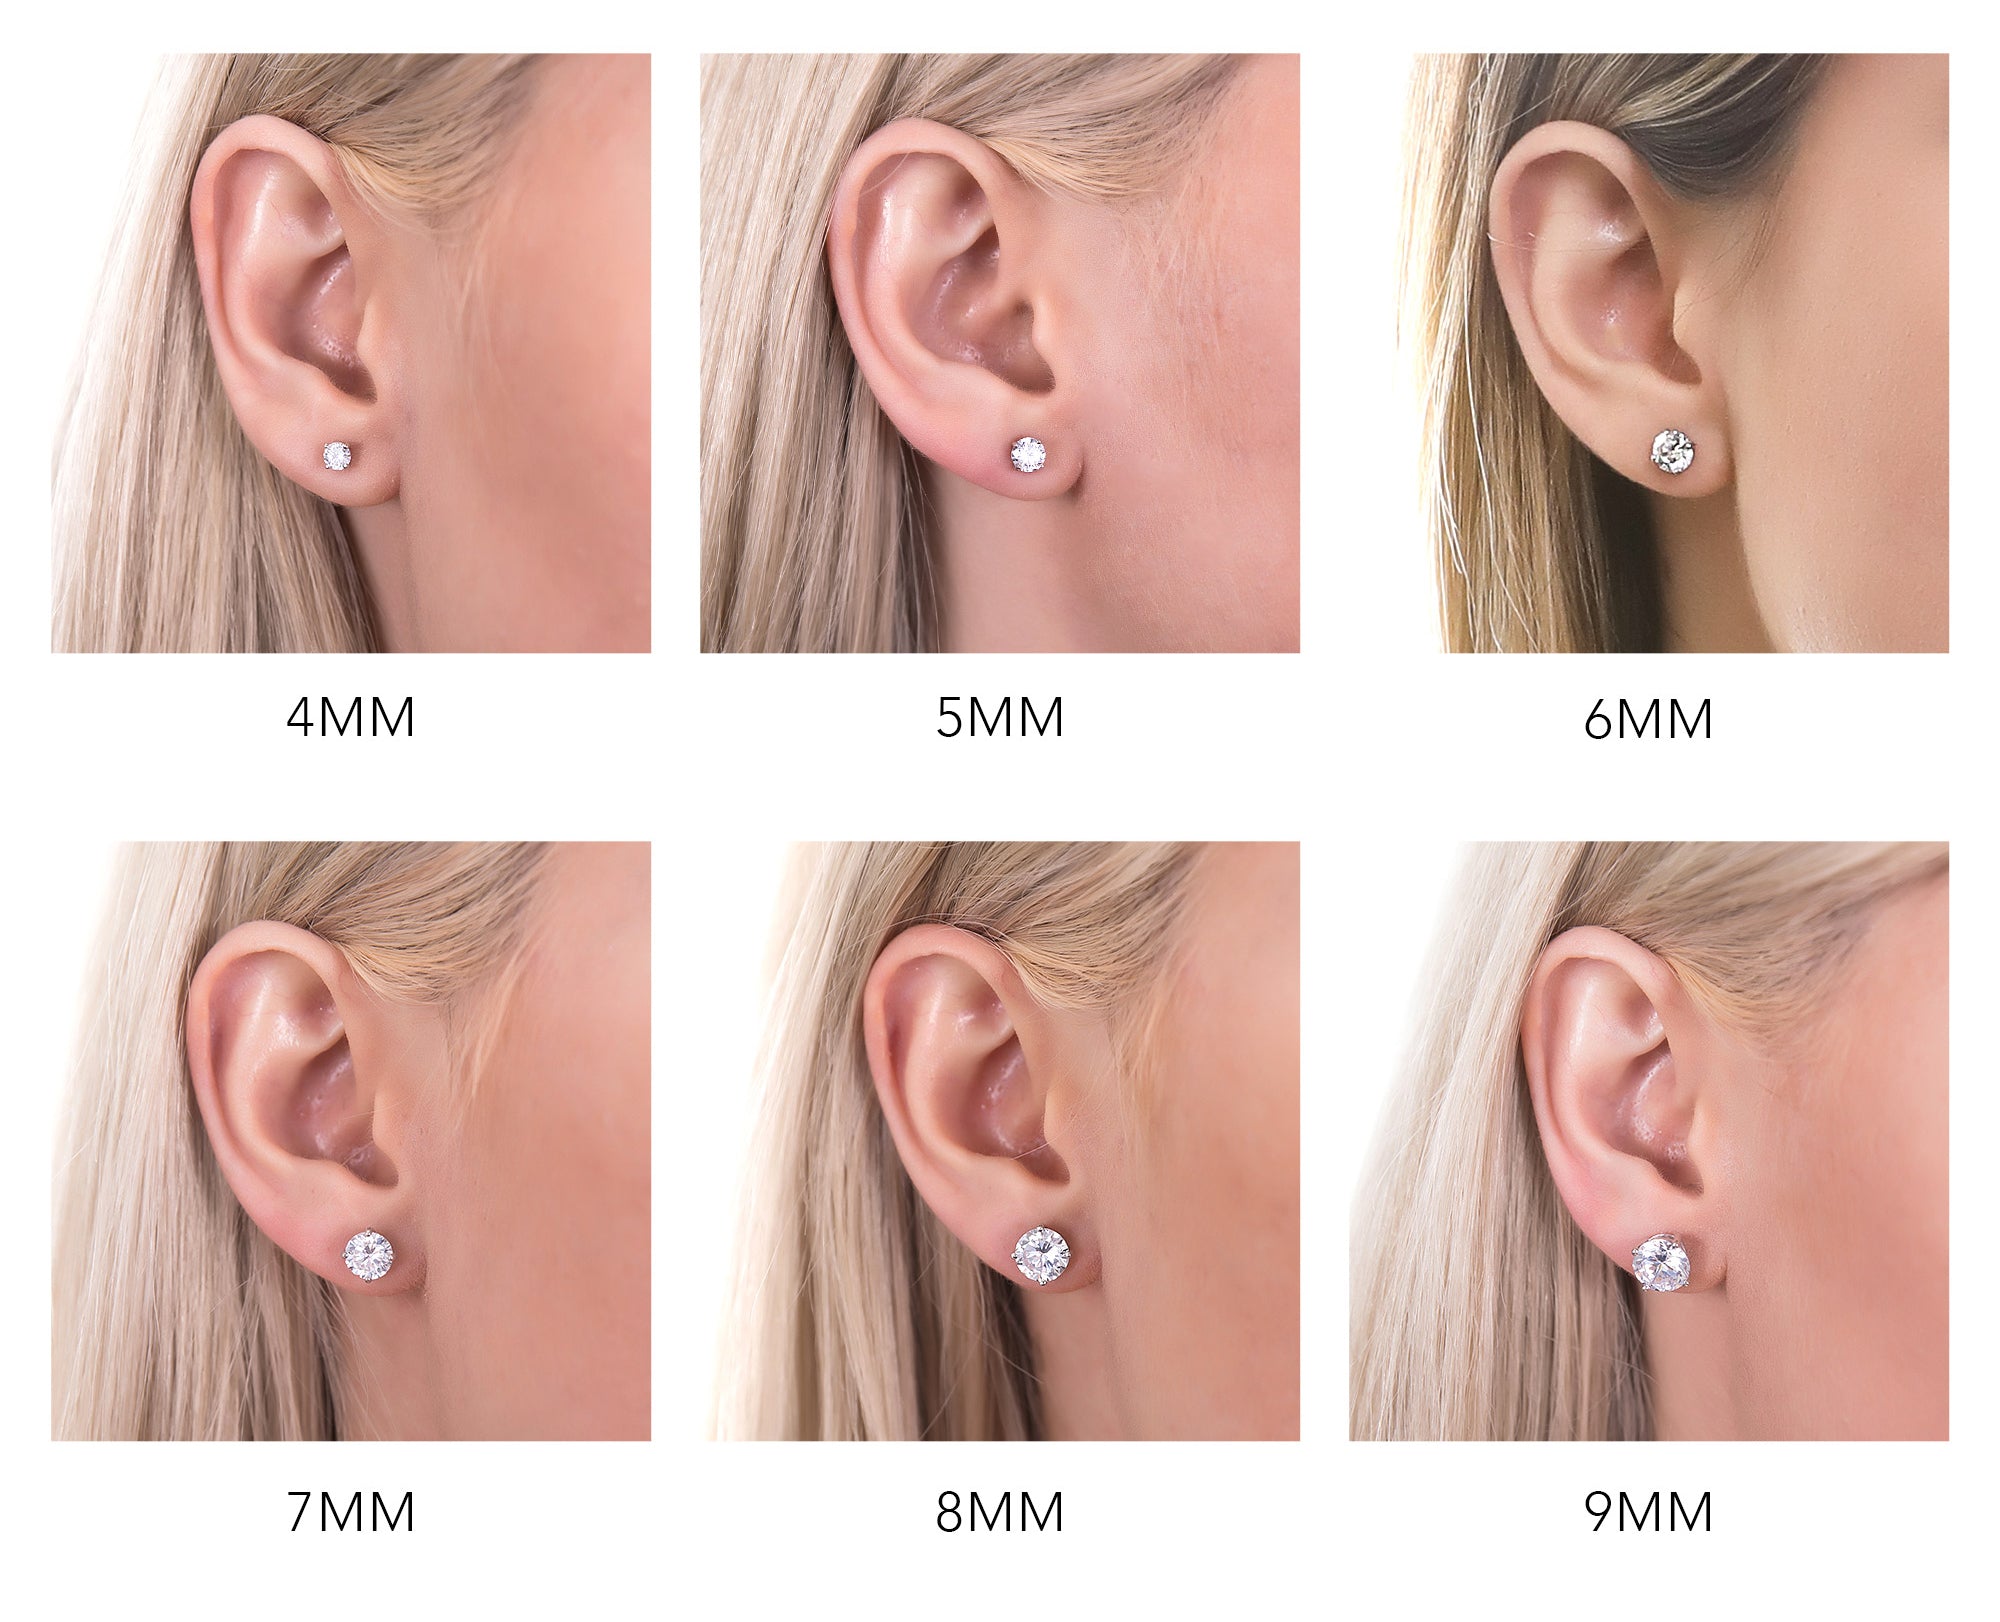 Can I wear a regular post in my helix piercing? - Quora